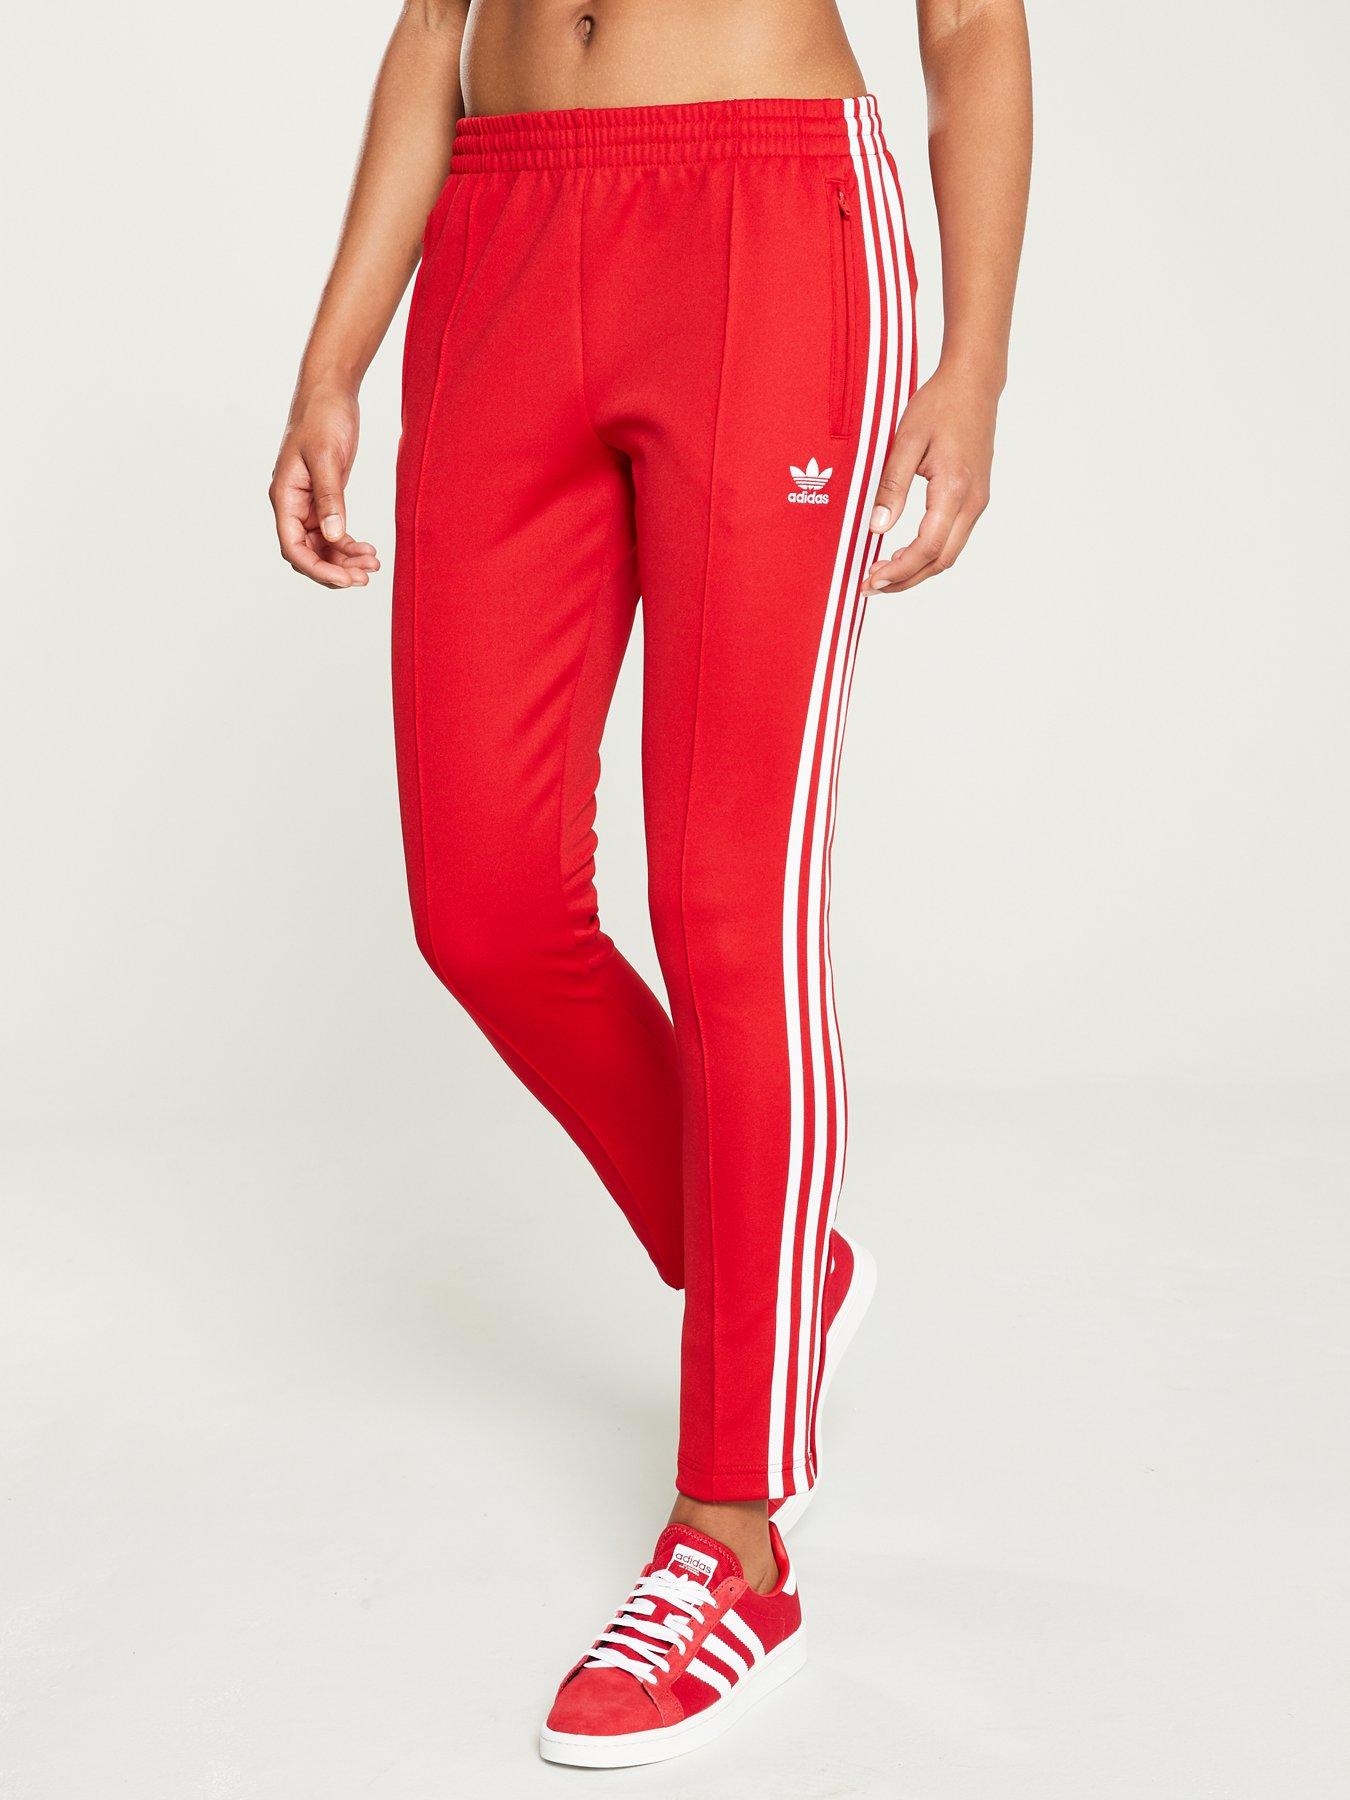 adidas 3 stripes red pants